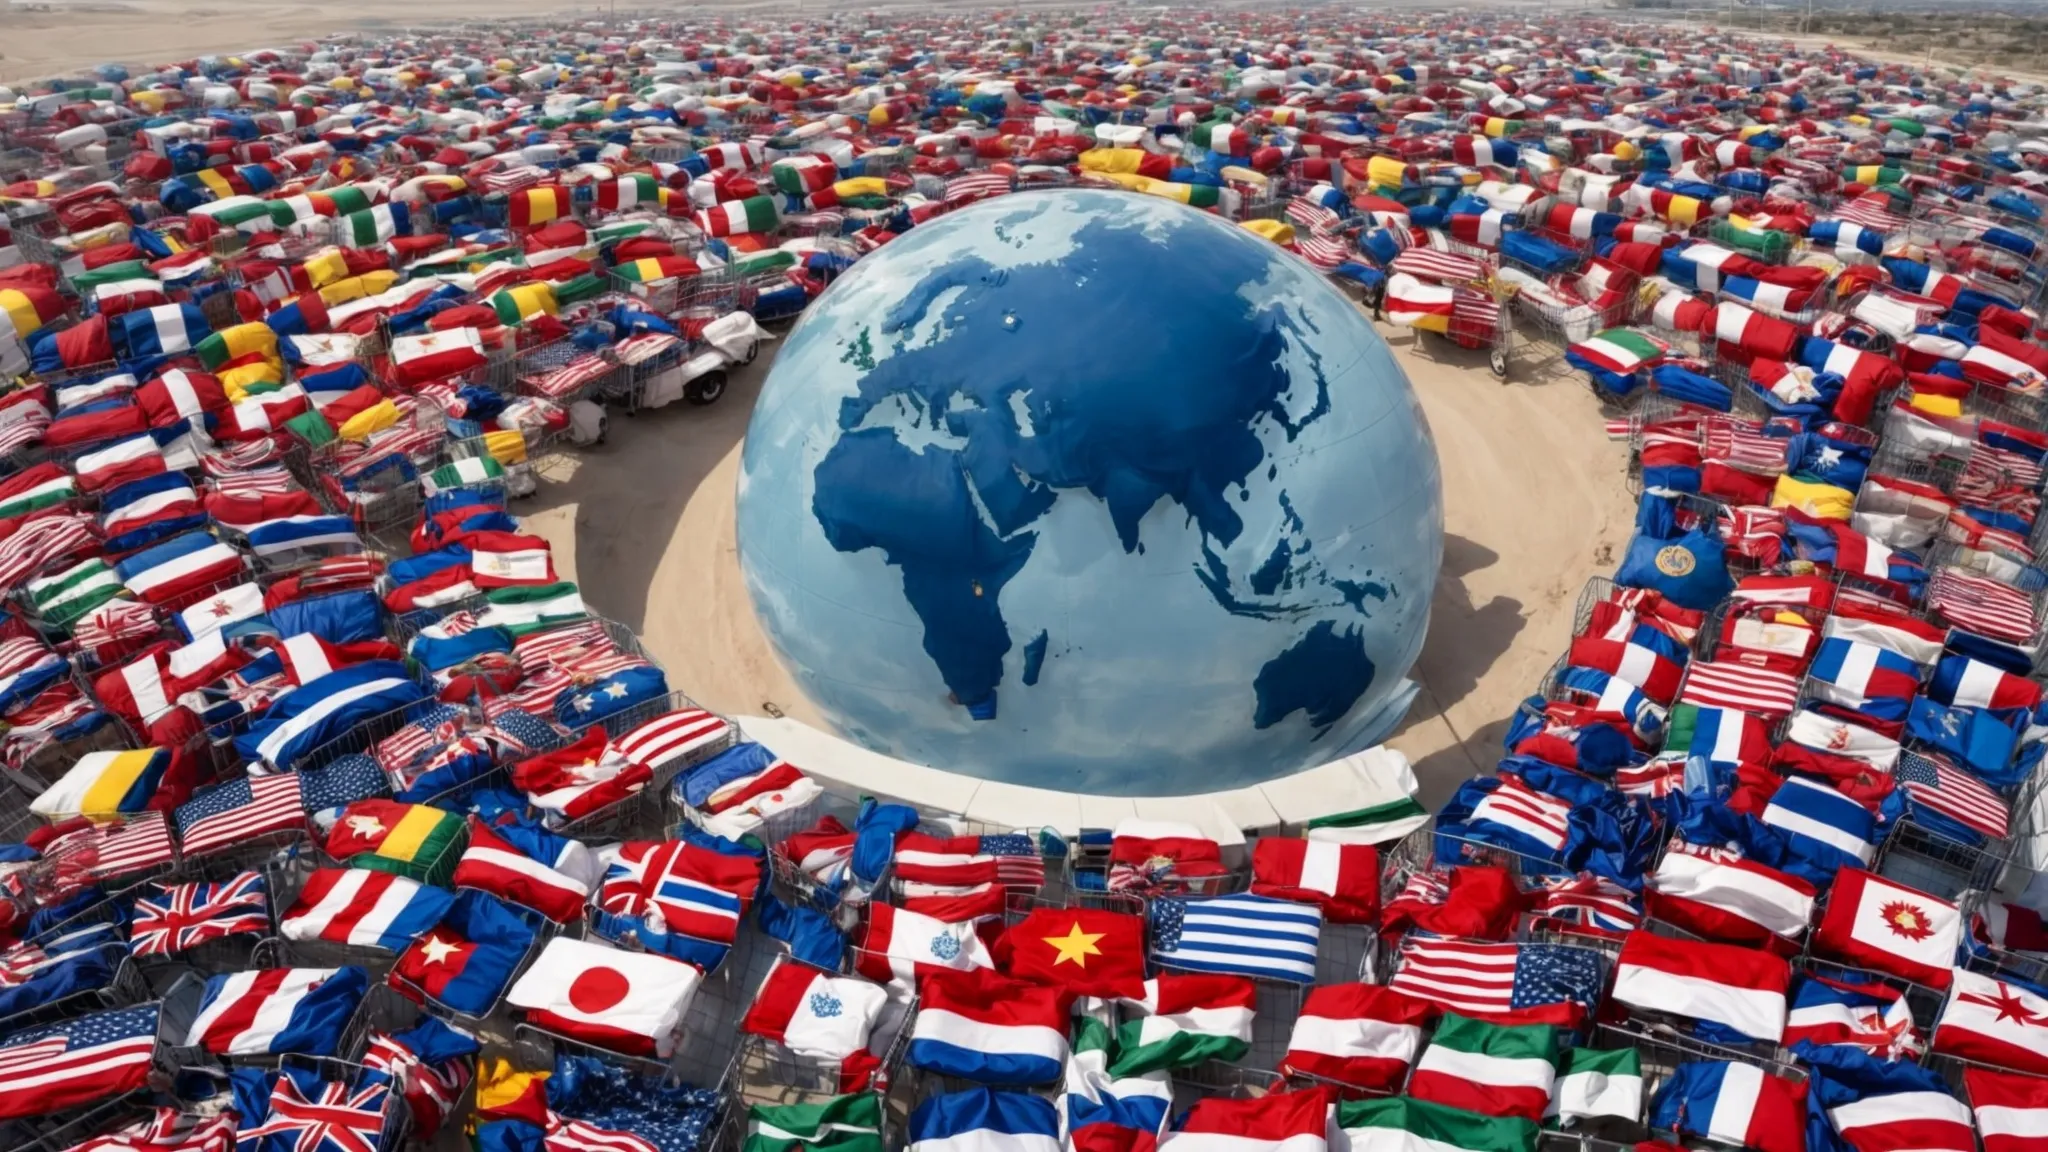 a globe surrounded by shopping carts and various national flags represents international ecommerce.